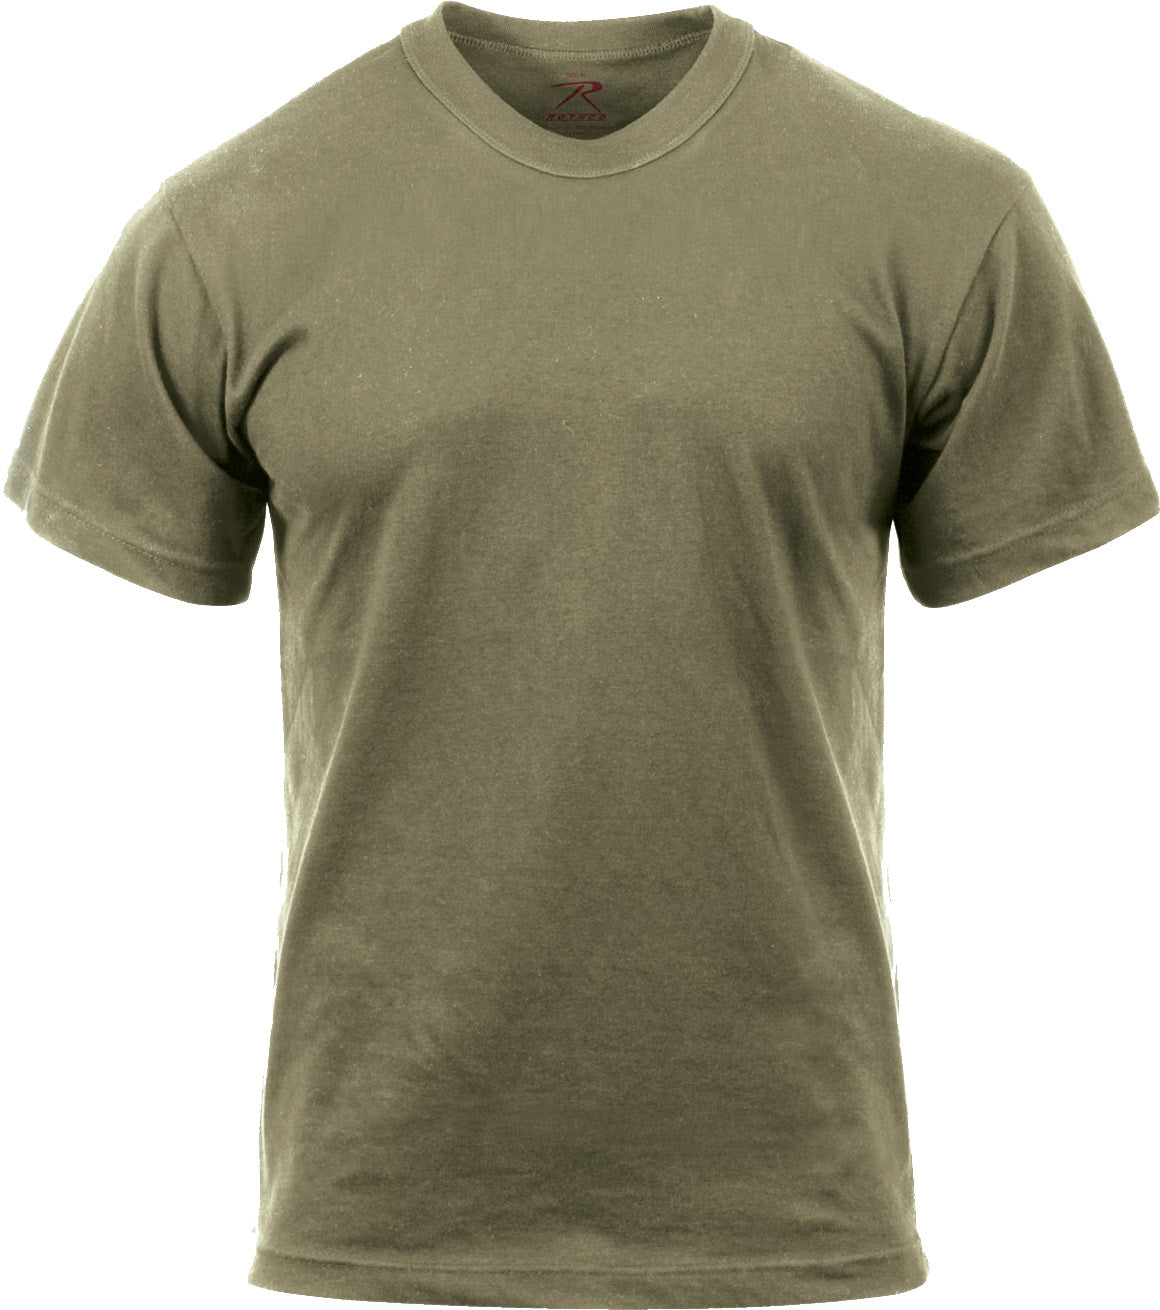 Coyote Brown Solid Color 100% Cotton T-Shirt